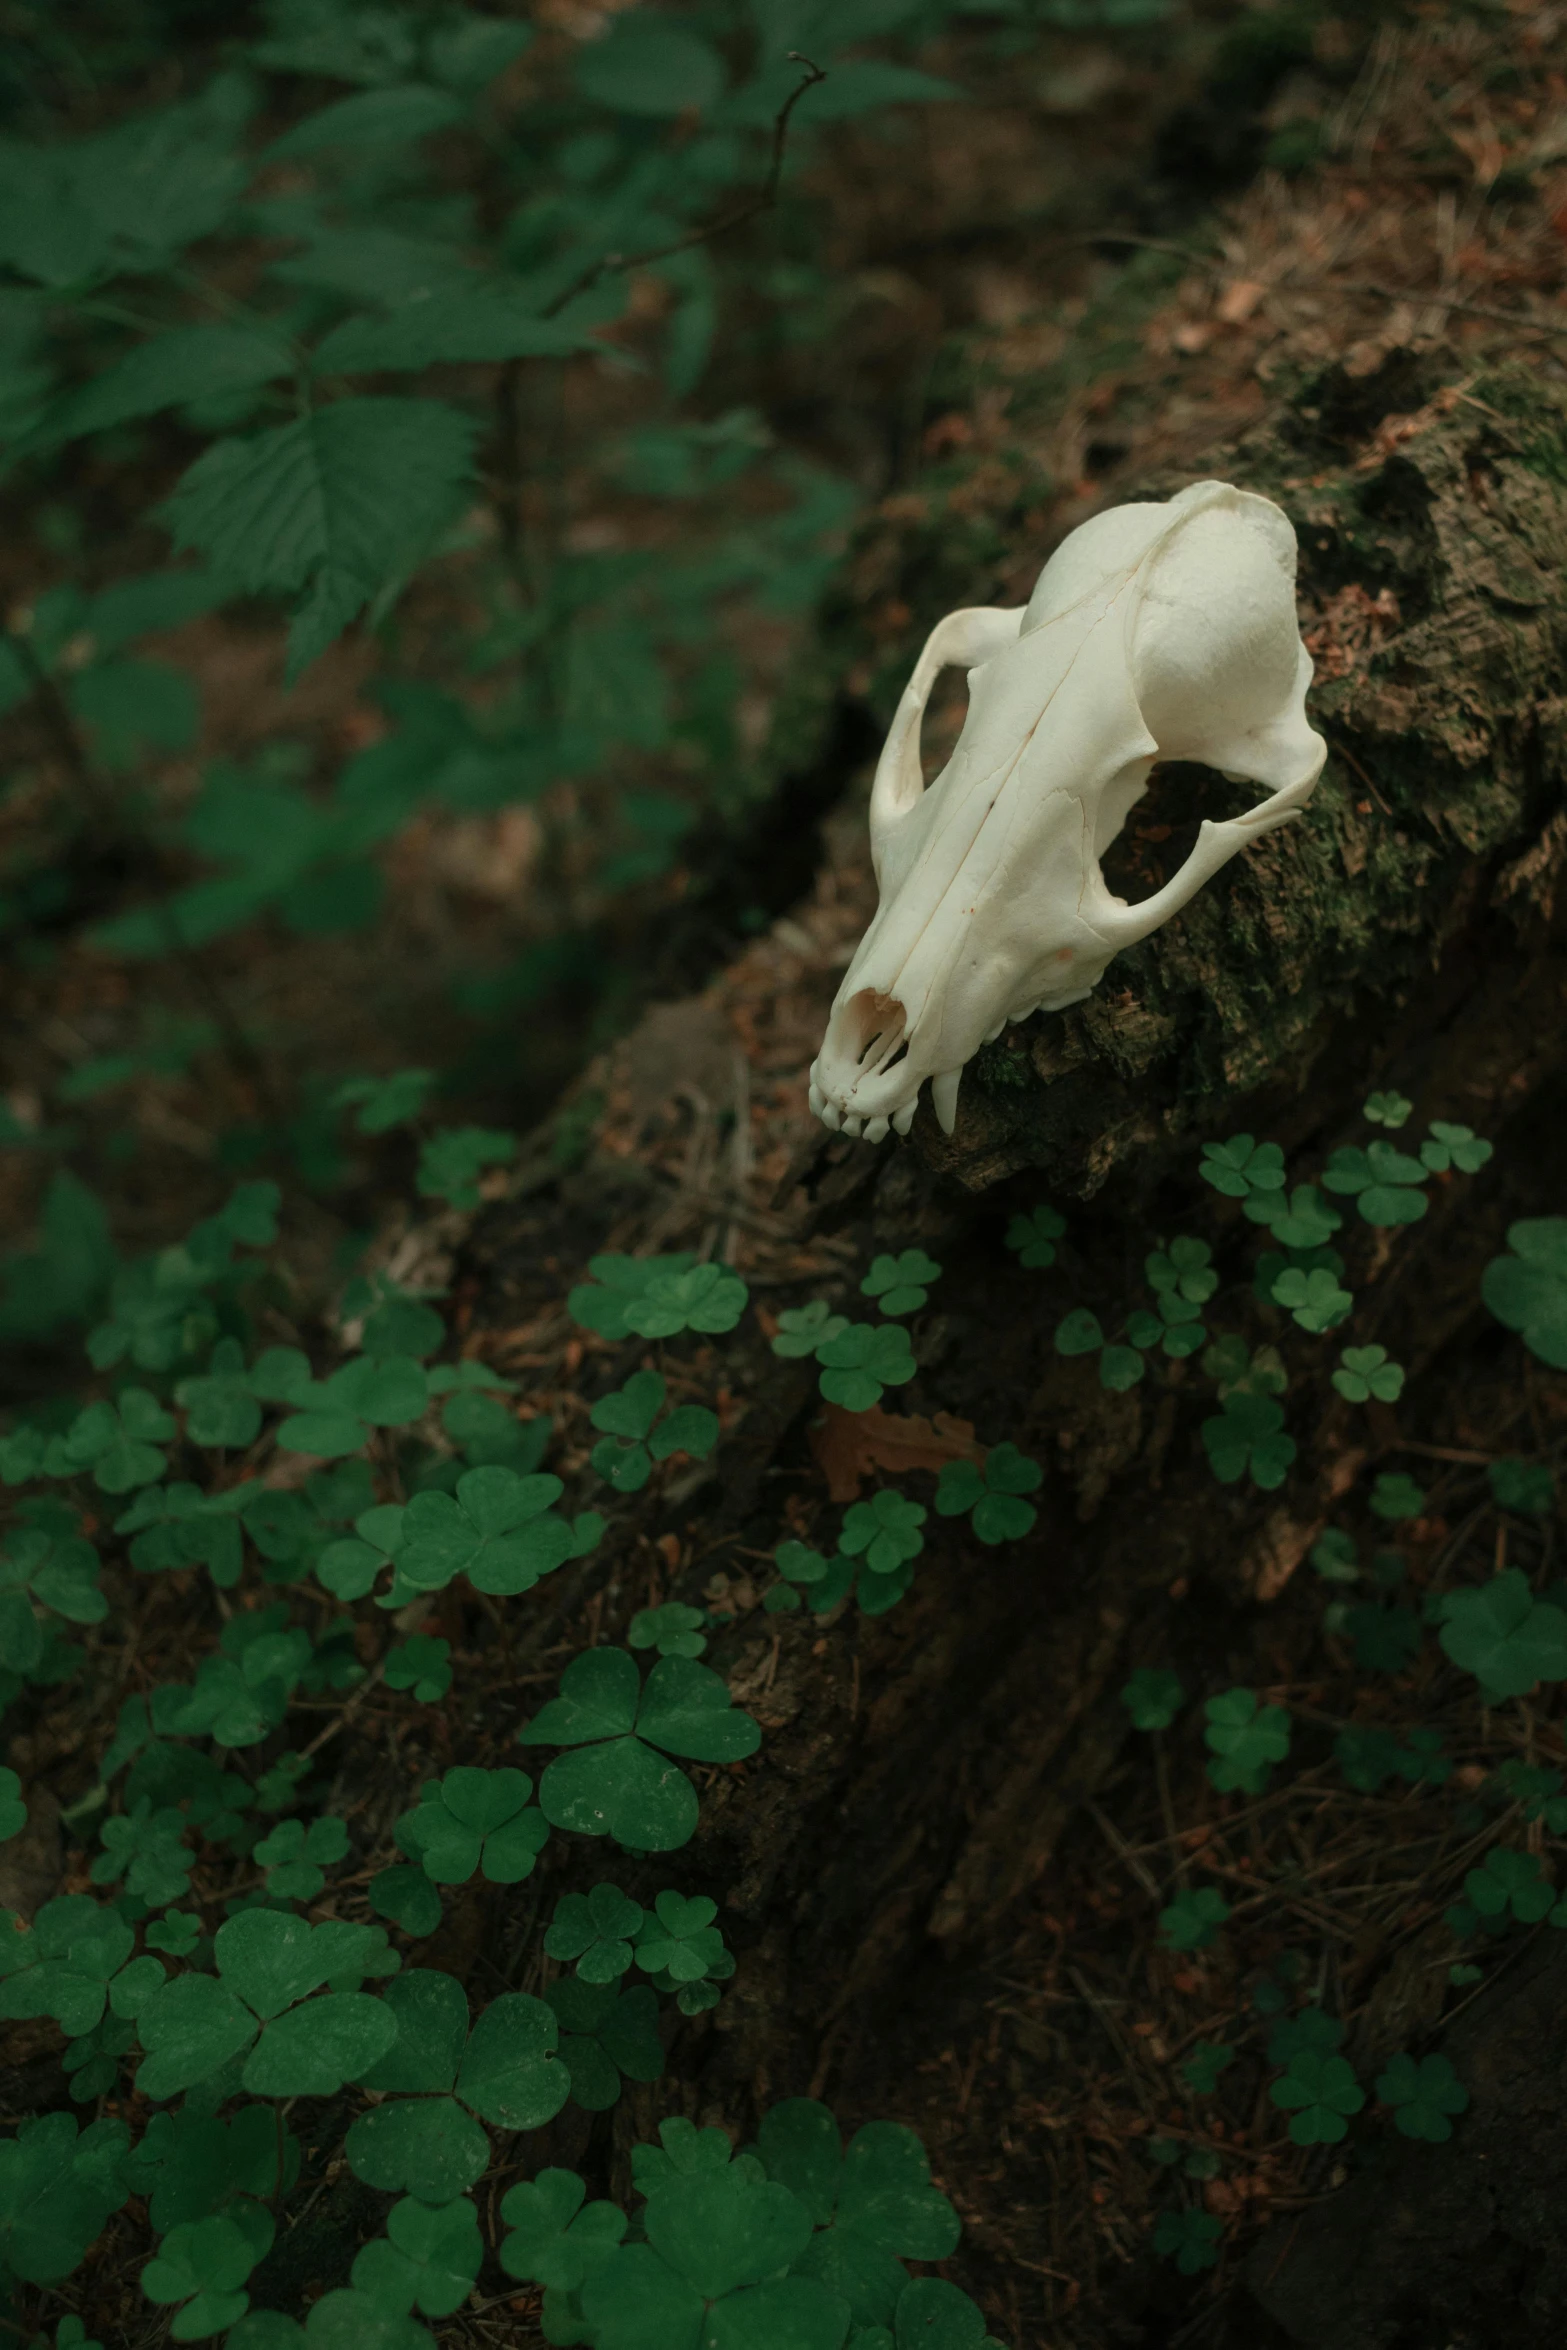 the skull of a cow rests on a rock in a green forest